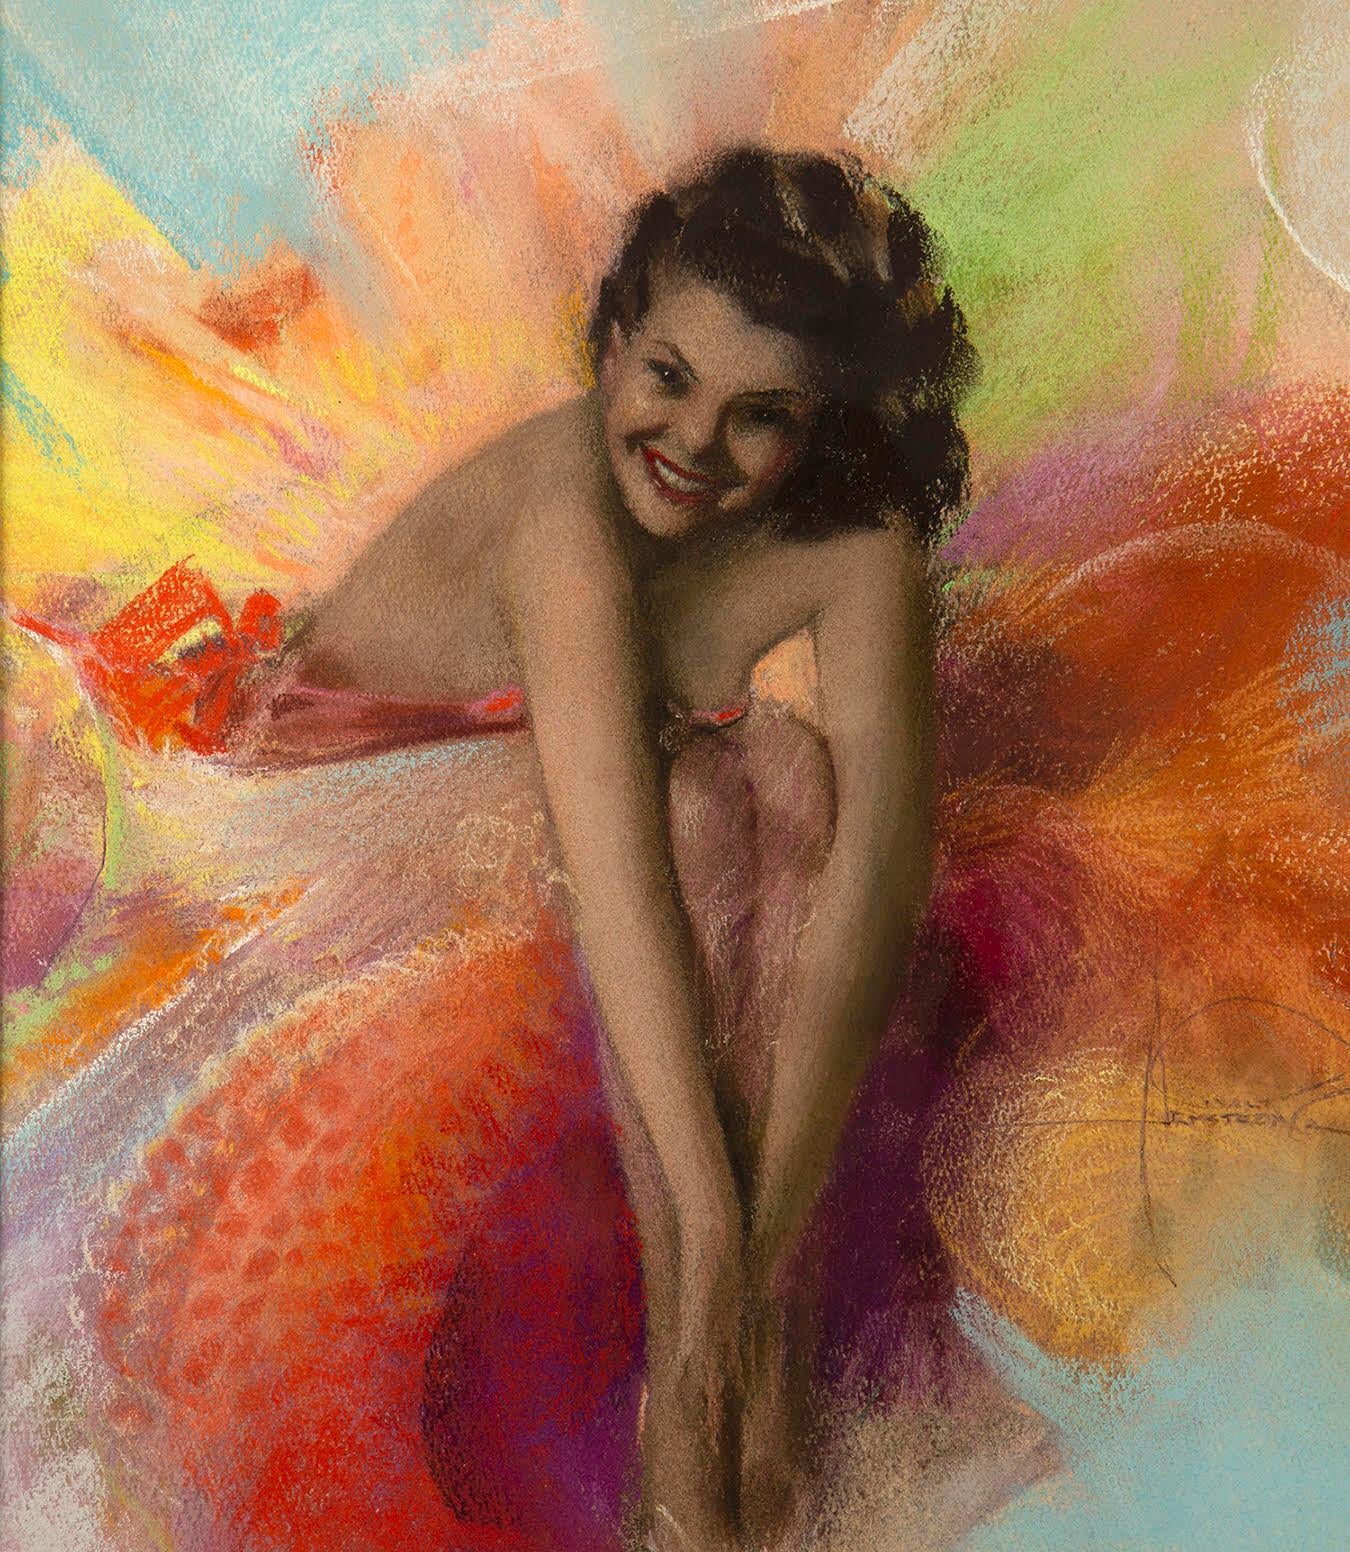 This is a fun, c. 1950, unpublished pastel illustration by the Father of American Pin-Up, Rolf Armstrong. This well-rendered whimsical sketch features the artist's muse and lifelong friend Jewel Flowers in an ethereal gown bursting with a